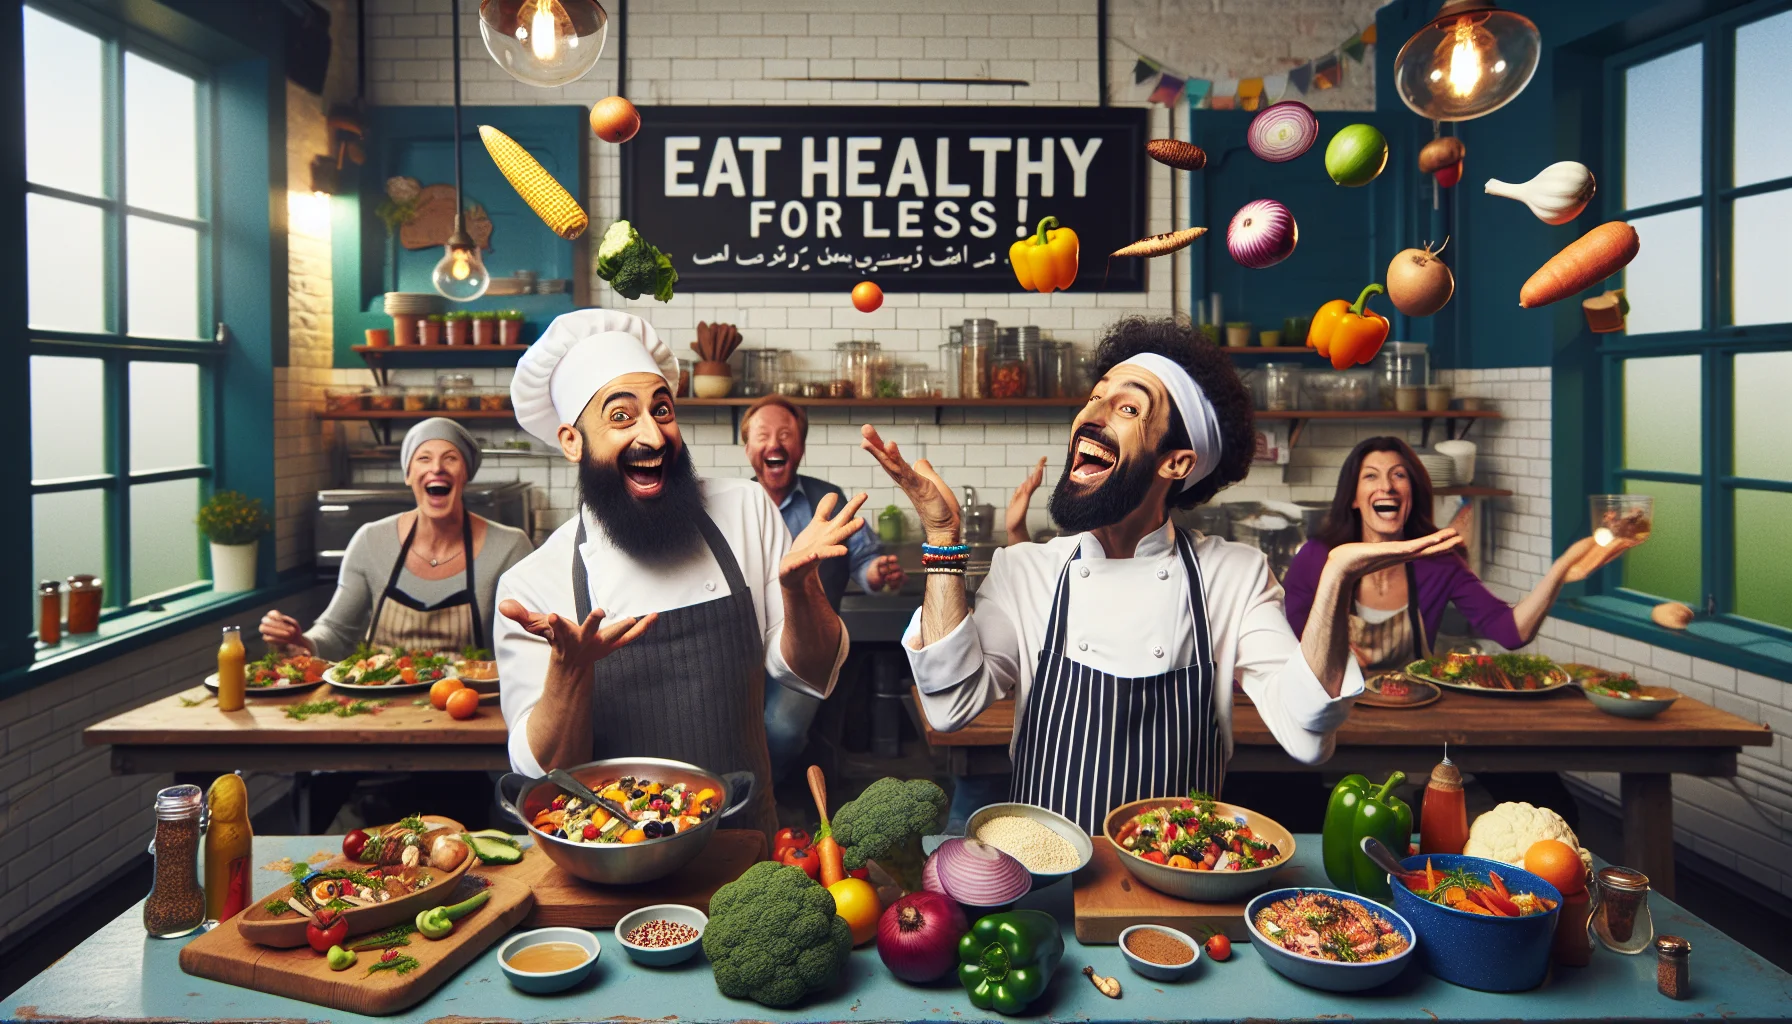 Imagine a whimsical scene inside a lively kitchen where a charming Middle-Eastern male chef and a charismatic Caucasian female sous chef are enthusiastically preparing allergy-friendly meals. Their expressions convey great pleasure and humor, as they juggle an array of colorful, fresh vegetables in the air. A sign behind them reads 'Eat Healthy for Less!'. The energy is infectious, causing customers of various descents and genders sitting at the dining area to heartily laugh along. Plates filled with nutritious, vibrant-colored dishes indicate the diversity of dietary options. The setting is light-hearted and inviting, a fun testament to delicious, affordable, and allergy-friendly cuisine.